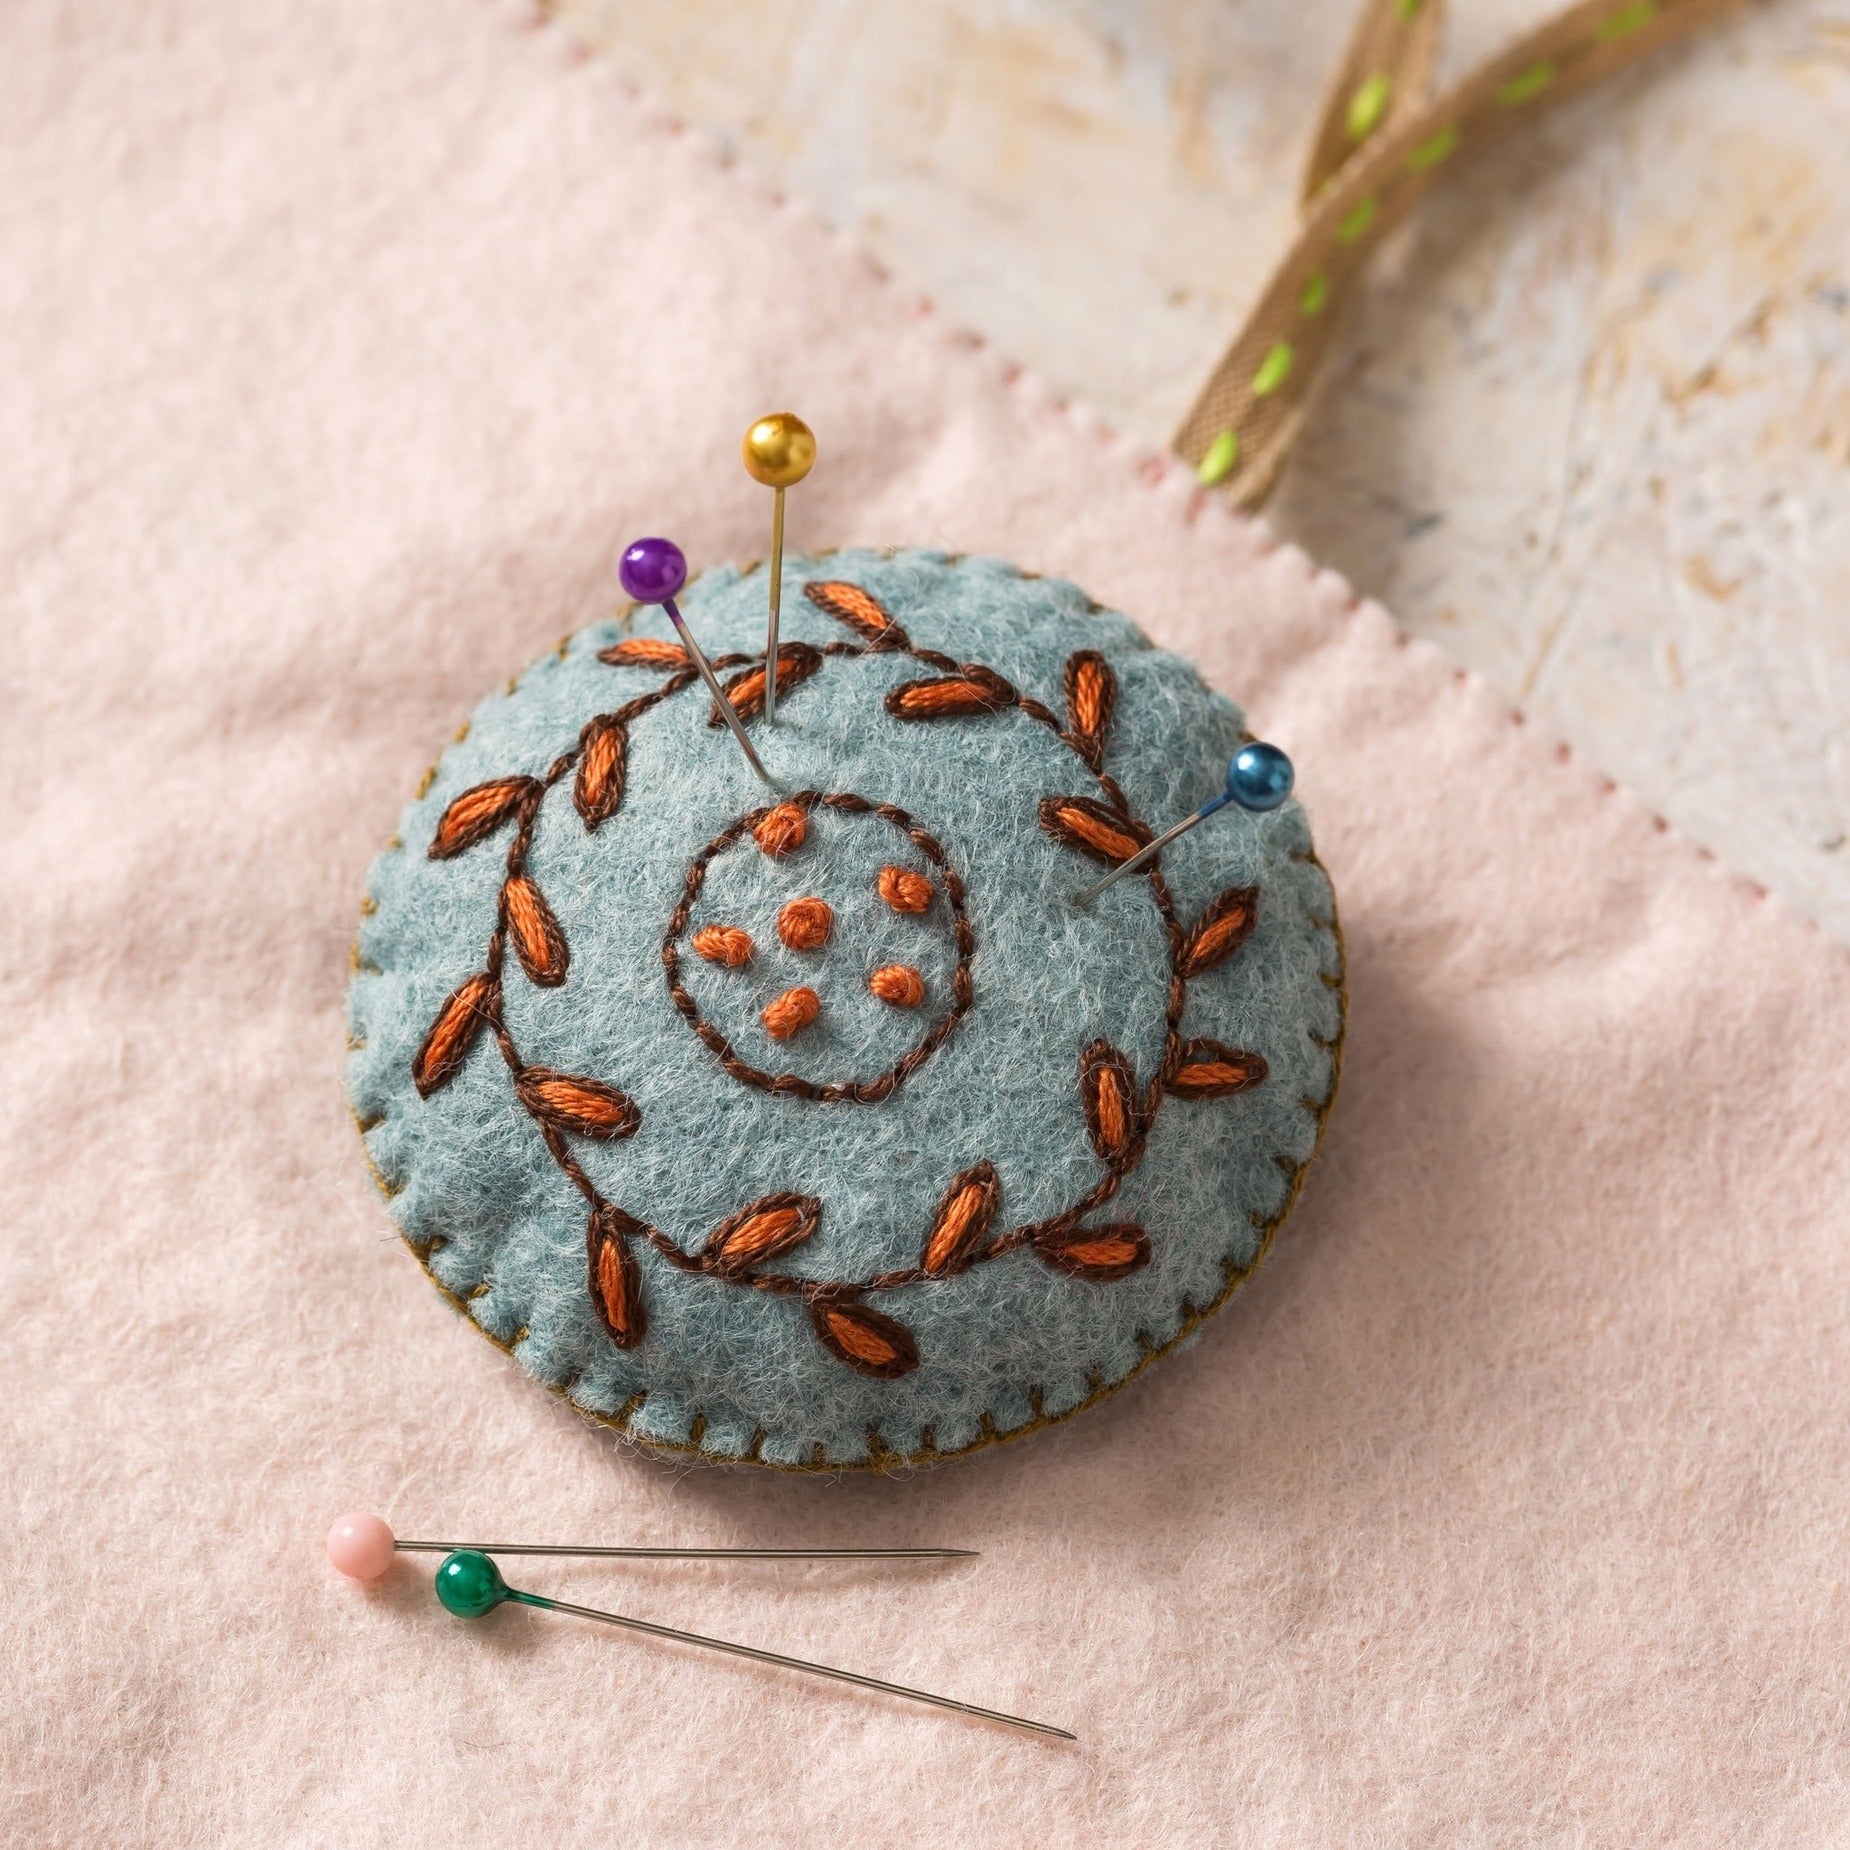 Handcrafted teal felt pin cushion adorned with intricate burnt-orange leaf embroidery and a whimsical button pattern, punctuated with vibrant pins, resting on a soft blush pink fabric background.